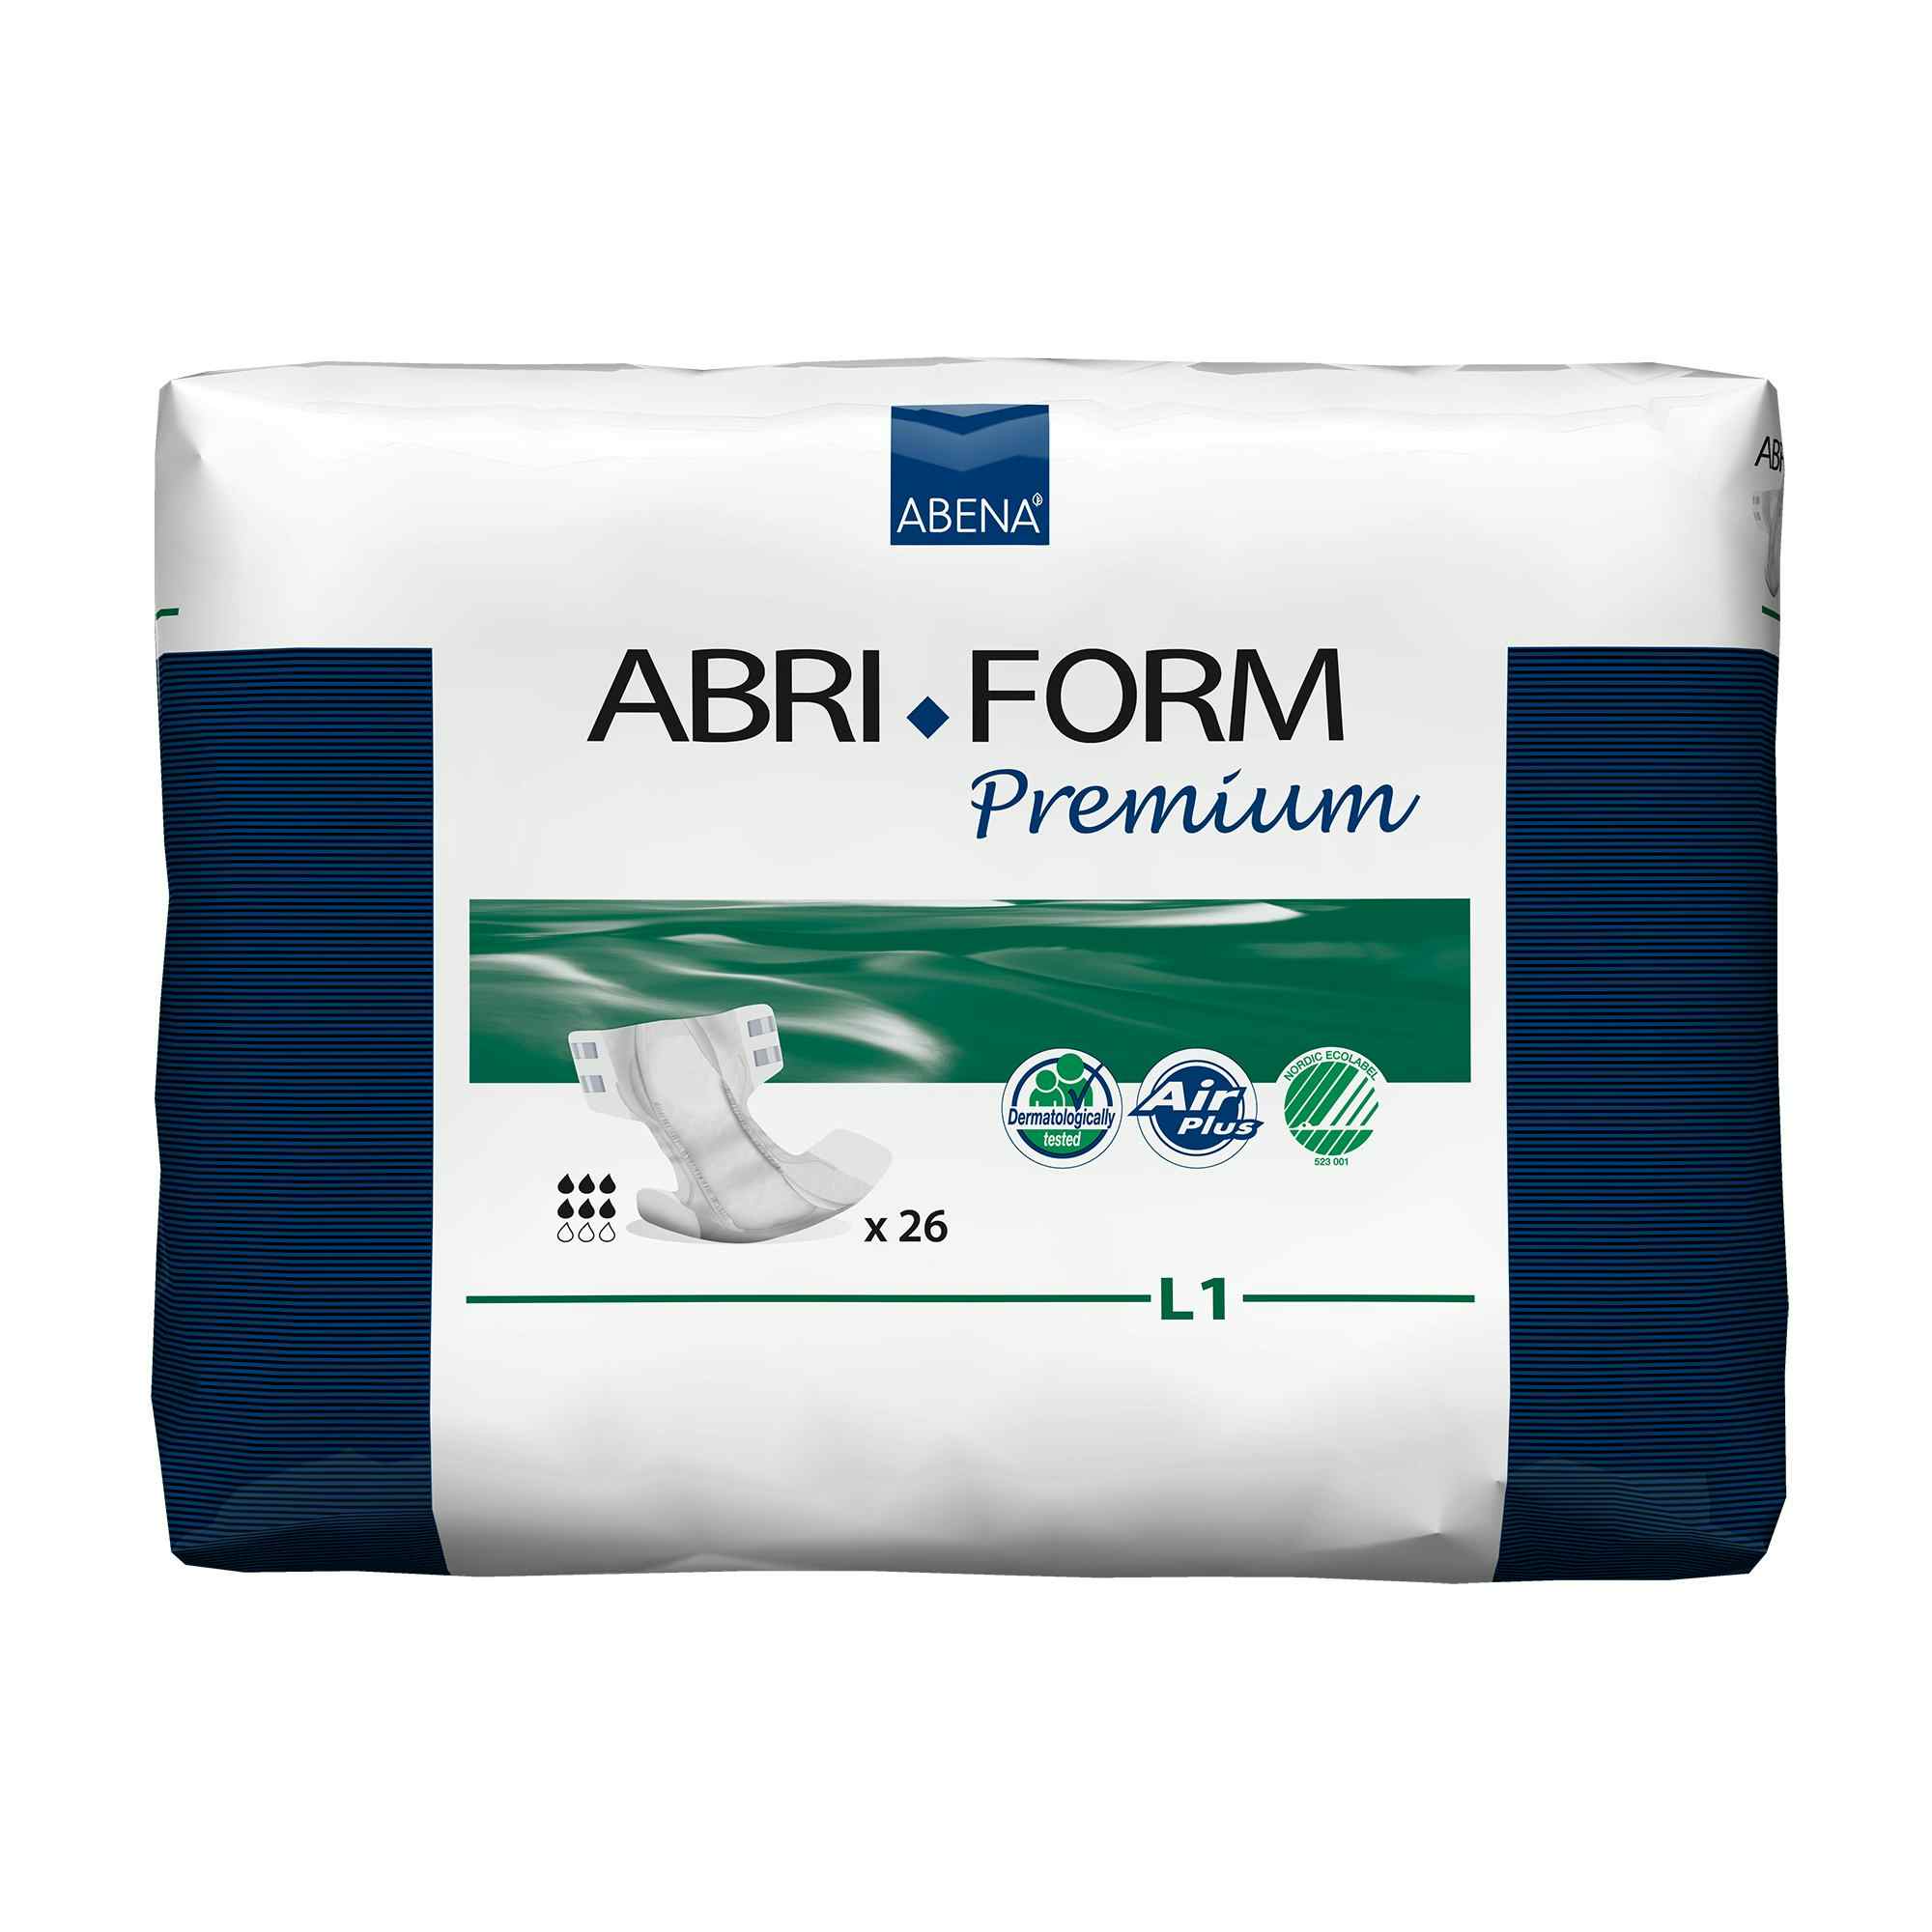 Abri-Form Premium L1 Unisex Adult Disposable Diaper with tabs, Heavy Absorbency, 43066, Large (40-60") - Case of 104 Diapers (4 Bags) 